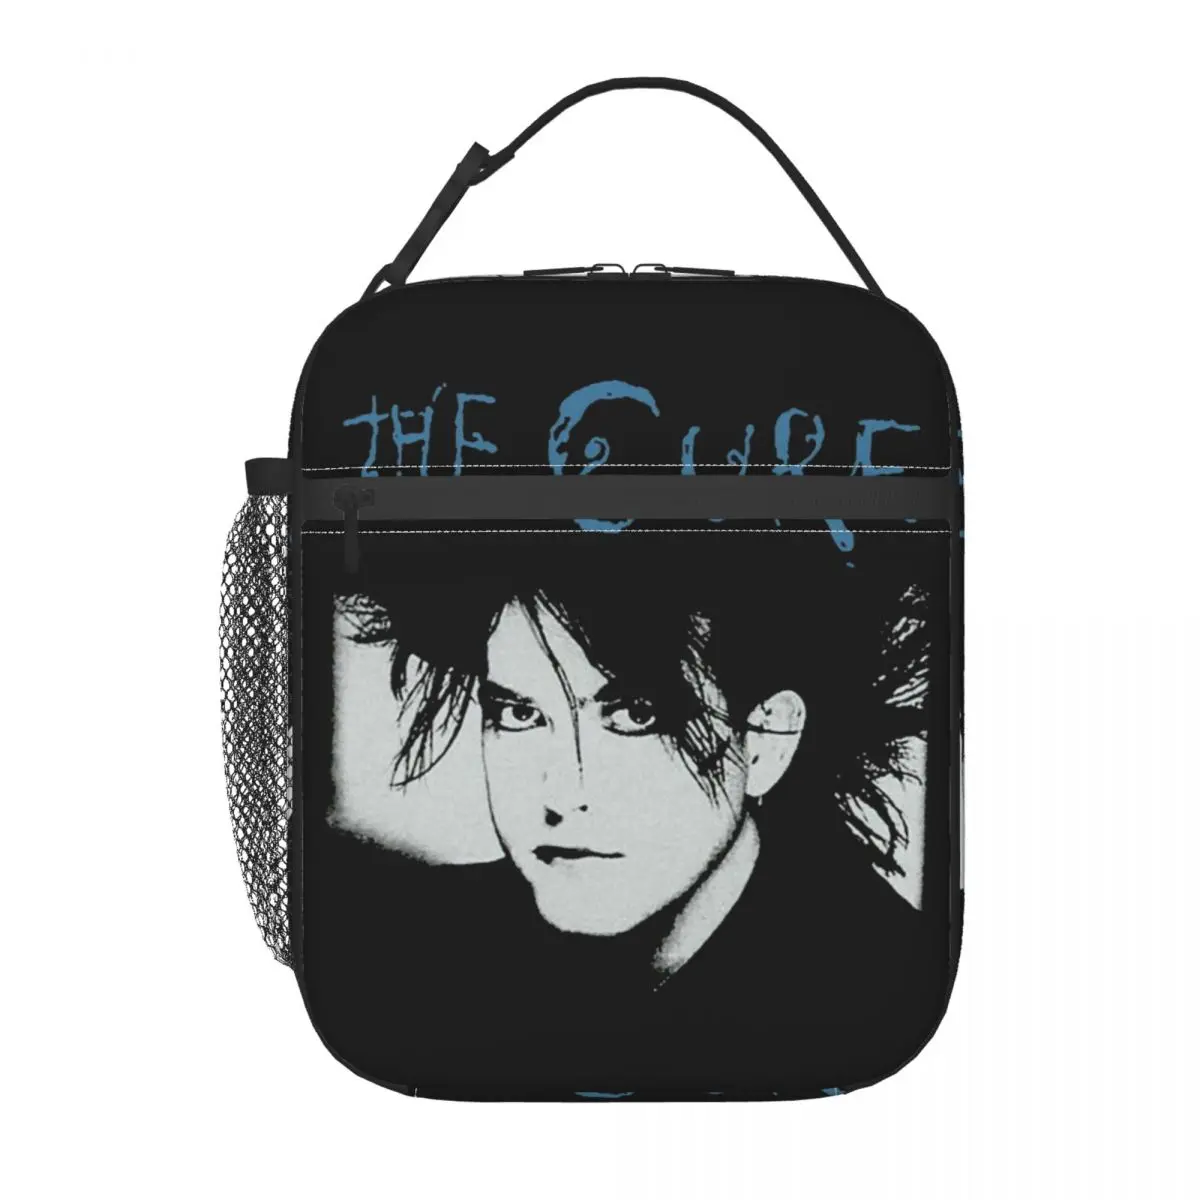 

Punk Rock Band The Cure Insulated Lunch Bag for Women Portable Cooler Thermal Bento Box Office Picnic Travel